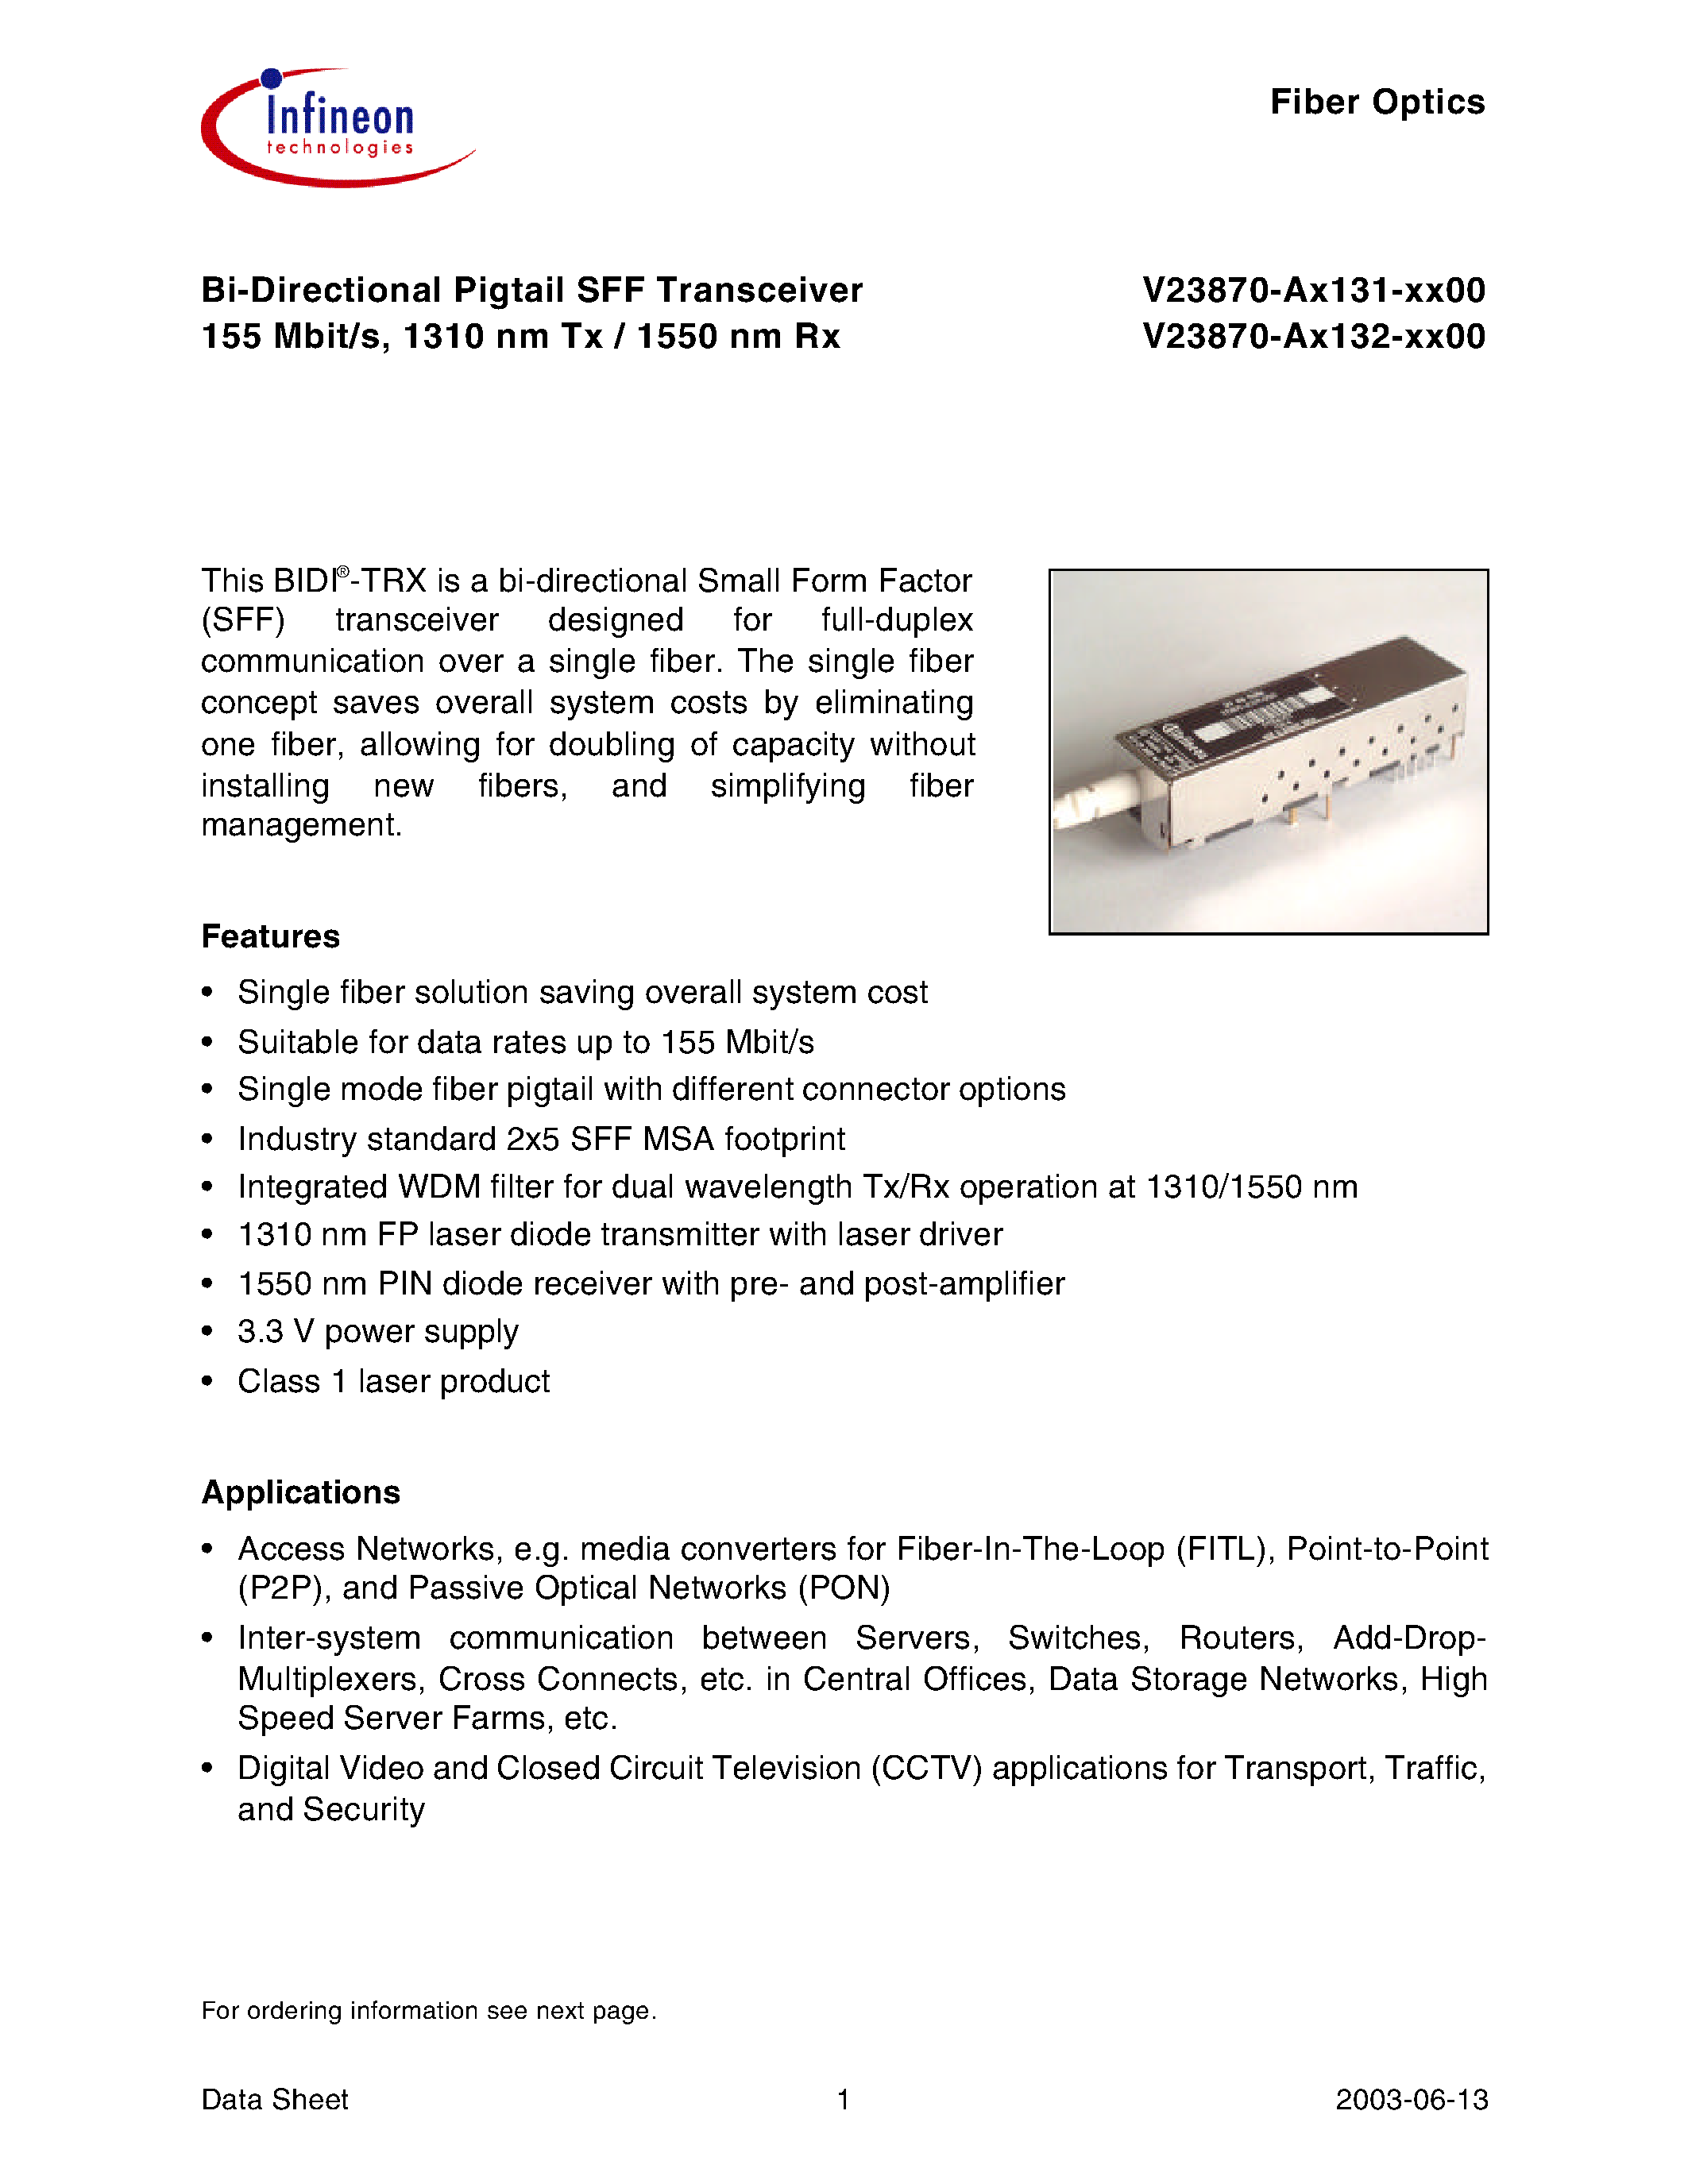 Datasheet V23870-A1131-K500 - Bi-Directional Pigtail SFF Transceiver 155 Mbit/s/ 1310 nm Tx / 1550 nm Rx page 1